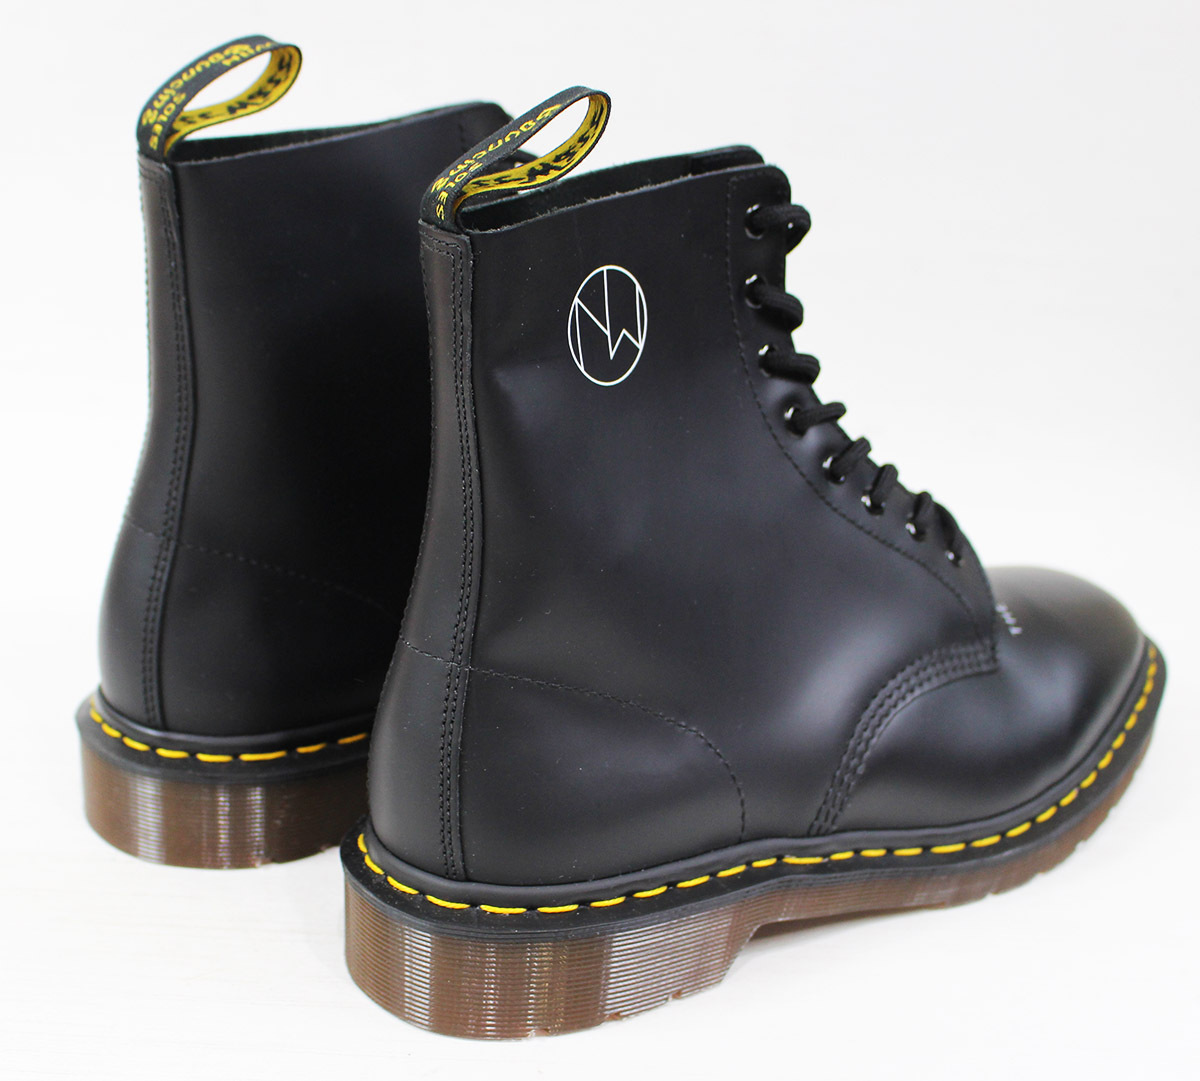 UNDERCOVER × Dr.Martens 1460 8HOLE Boots Black *THE NEW WARRIORS~ unused goods size 11(UK) / undercover / Dr. Martens 